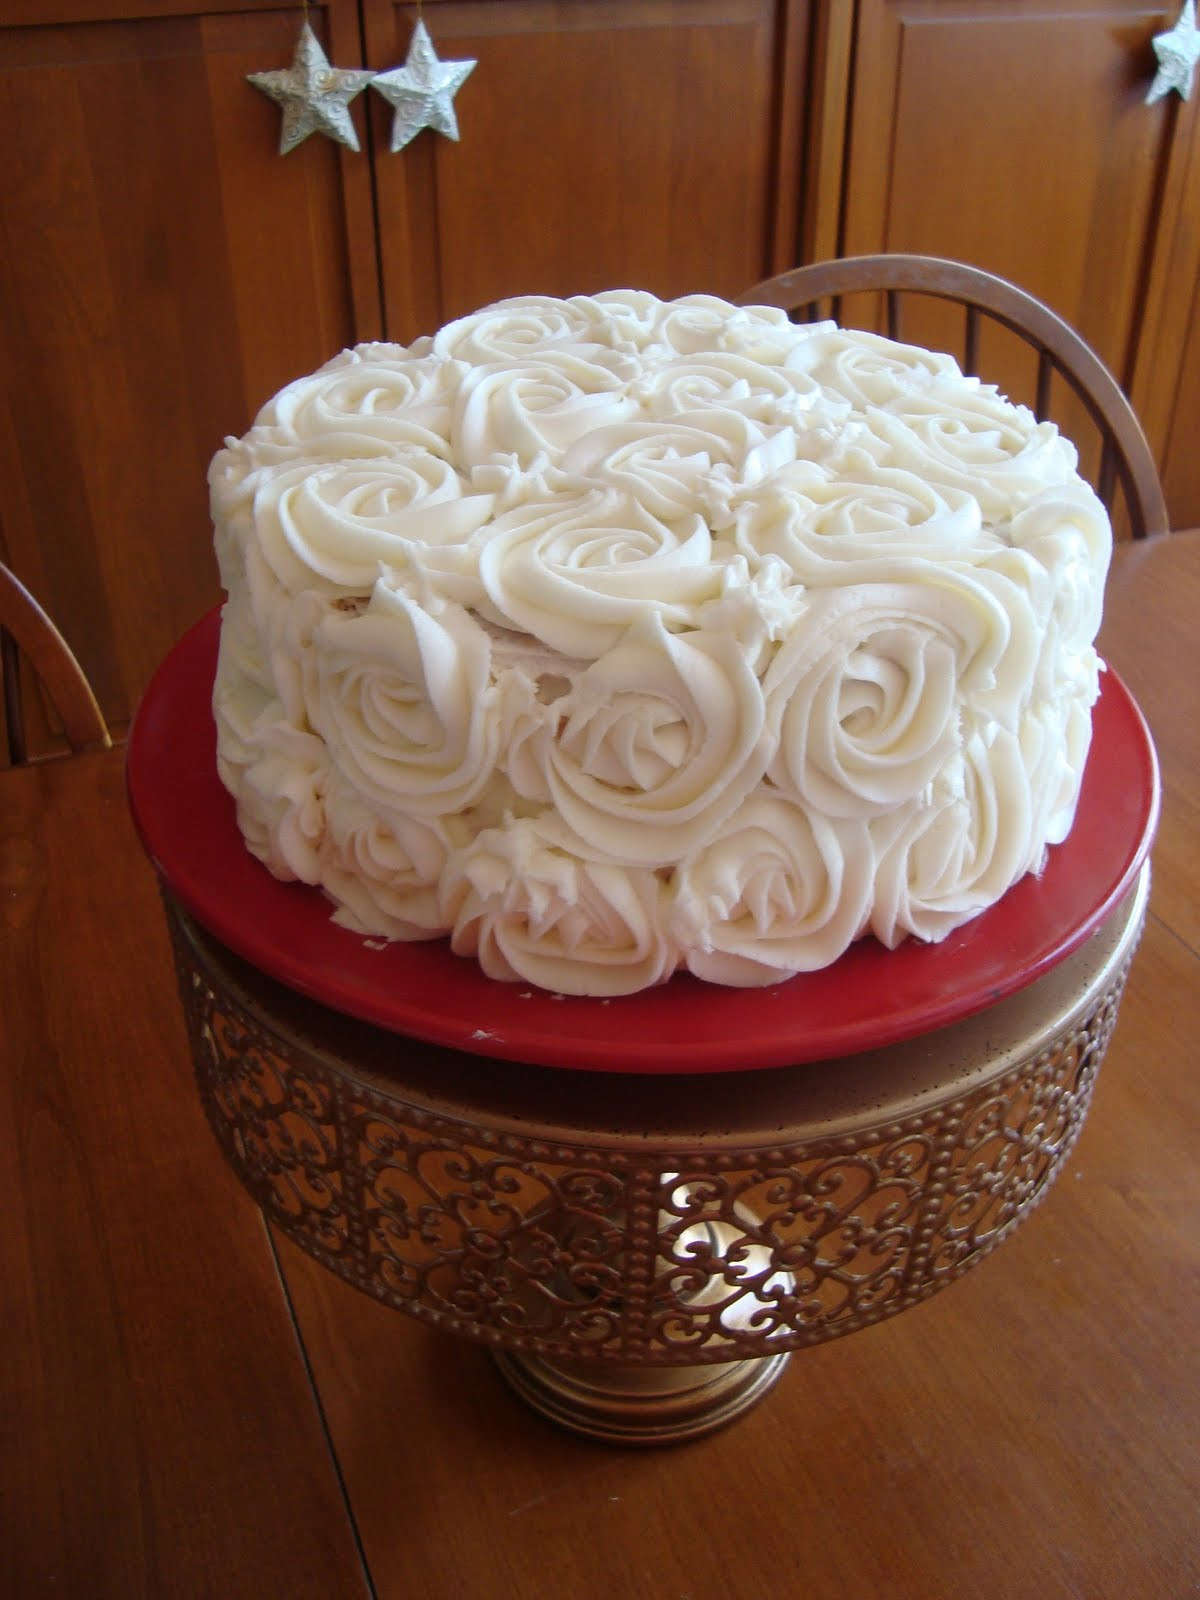 Wedding Cake Recipes From Scratch
 White wedding cake recipe from scratch